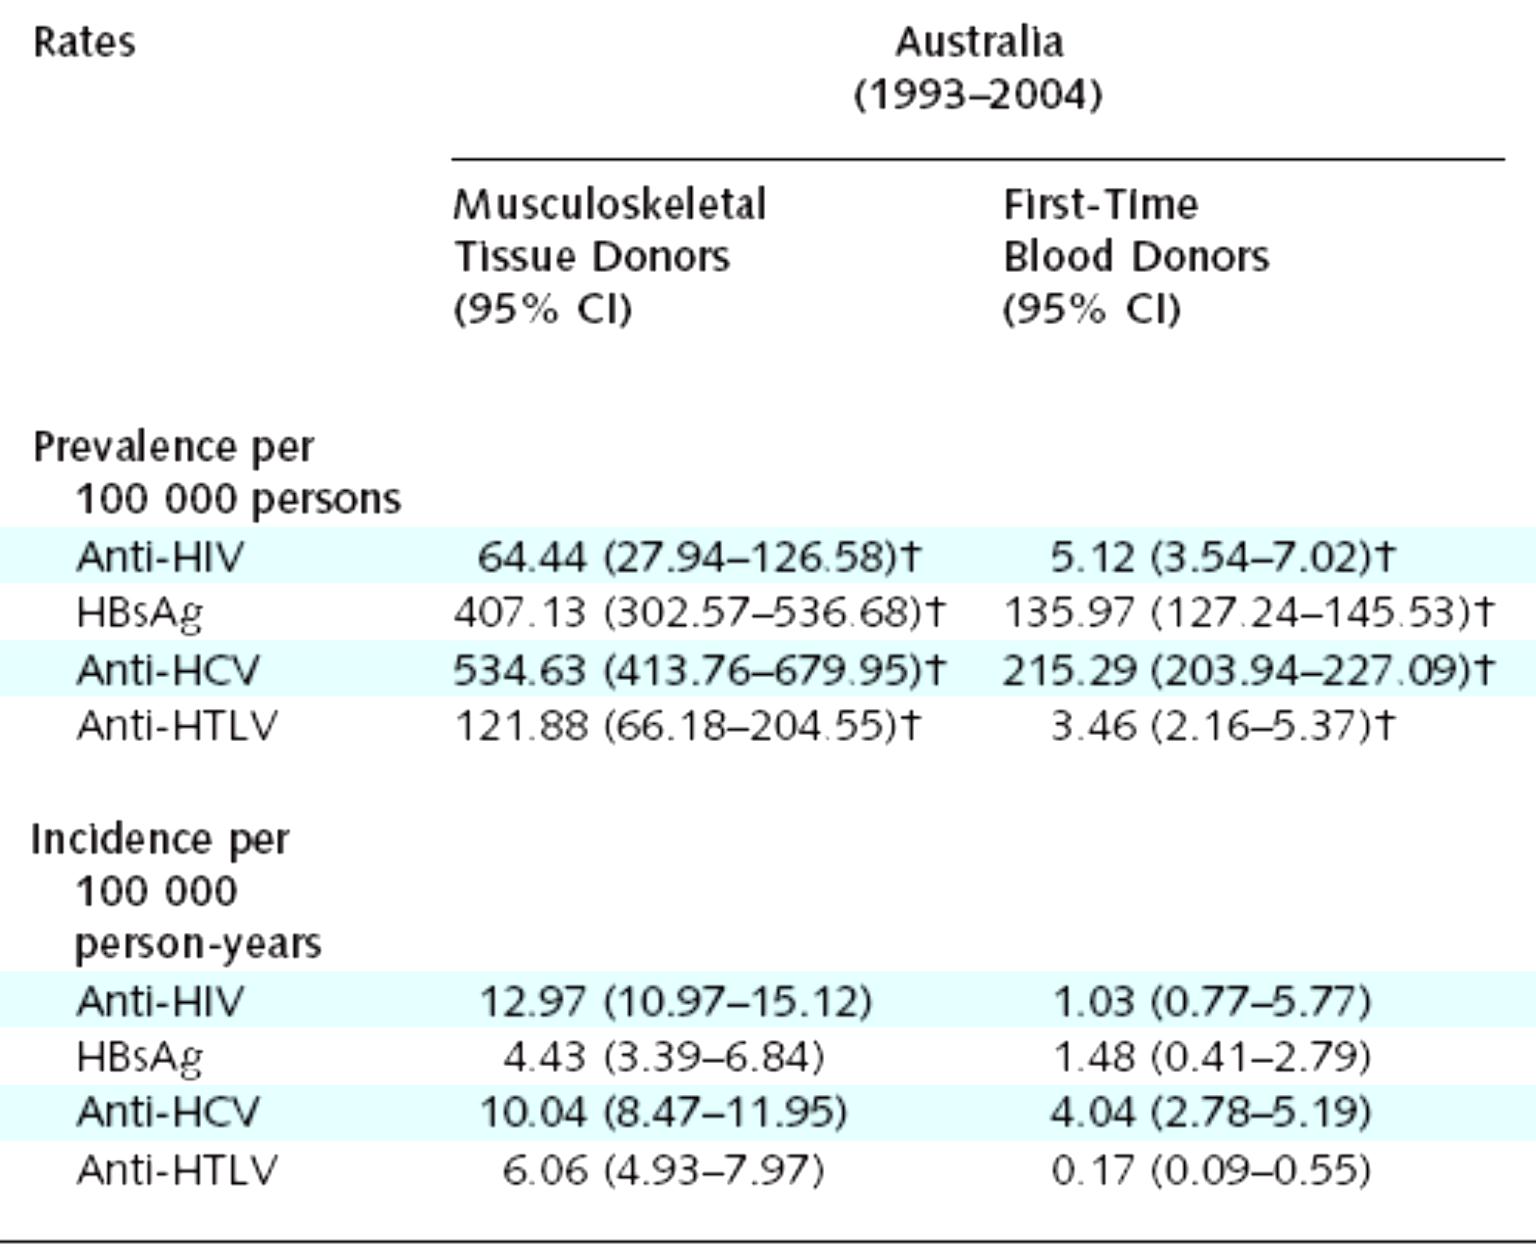 Prevalence and Incidence of Viral Infections among Musculoskeletal Tissue Donors and First-Time